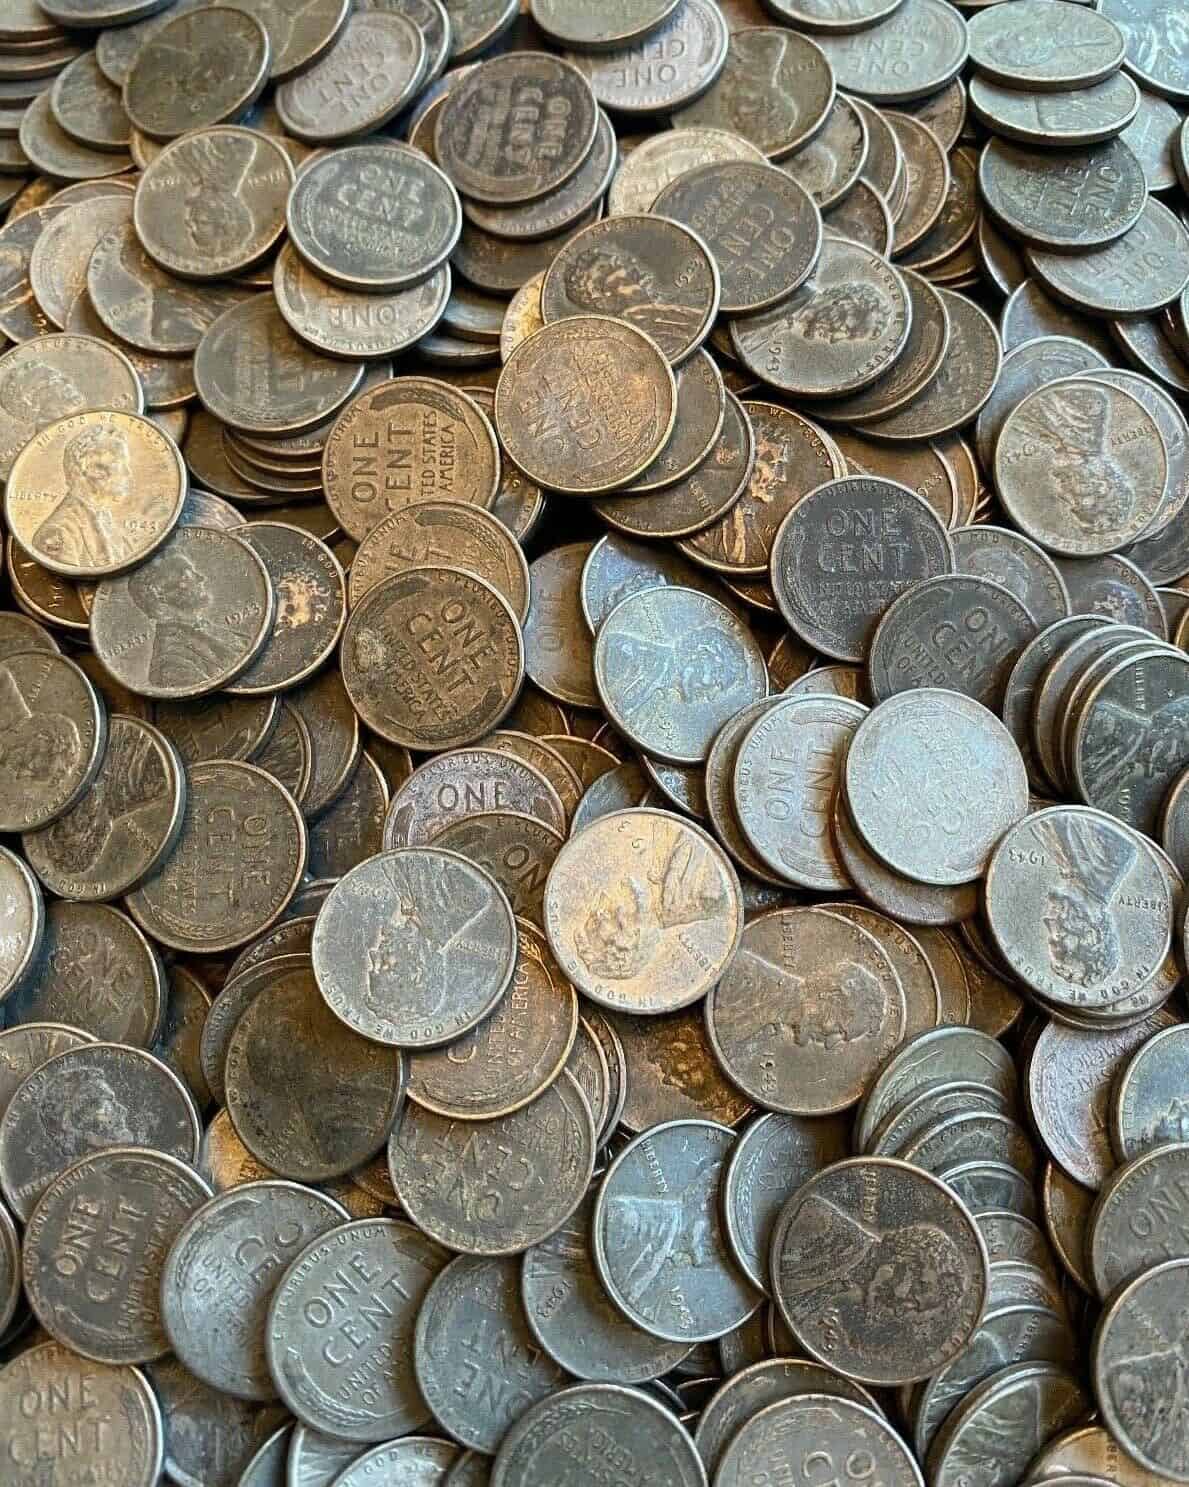 50 1 ROLL Coins Mixed P-D-S U.S Steel Wheat Cent Pennies Nice Average 